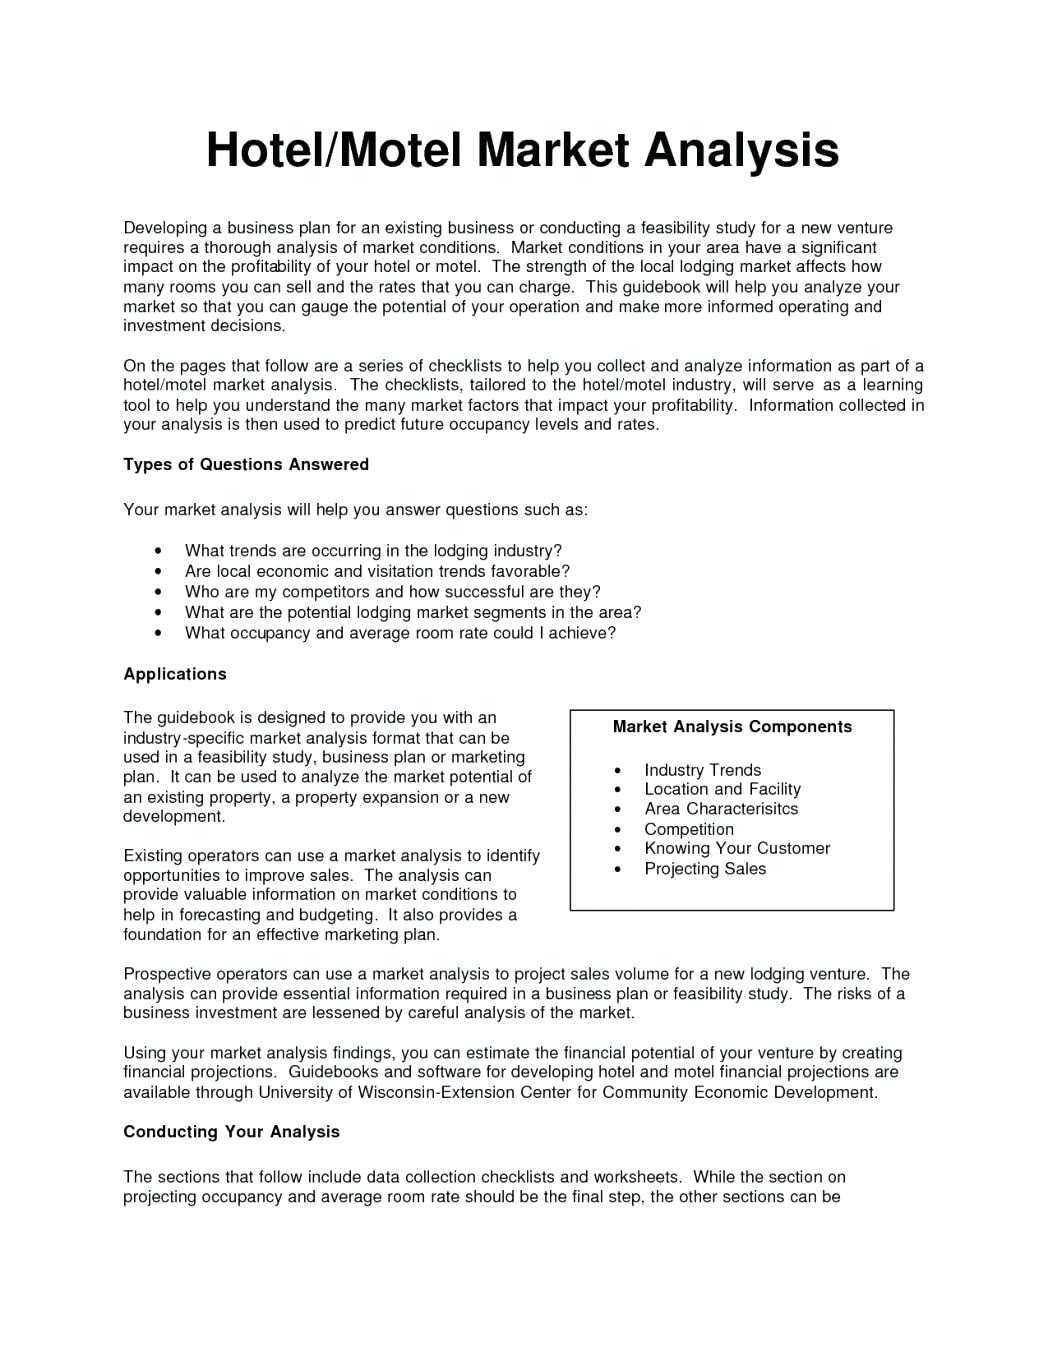 030 Business Plan Marketing Hotel And Motel Analysis Example Within Industry Analysis Report Template